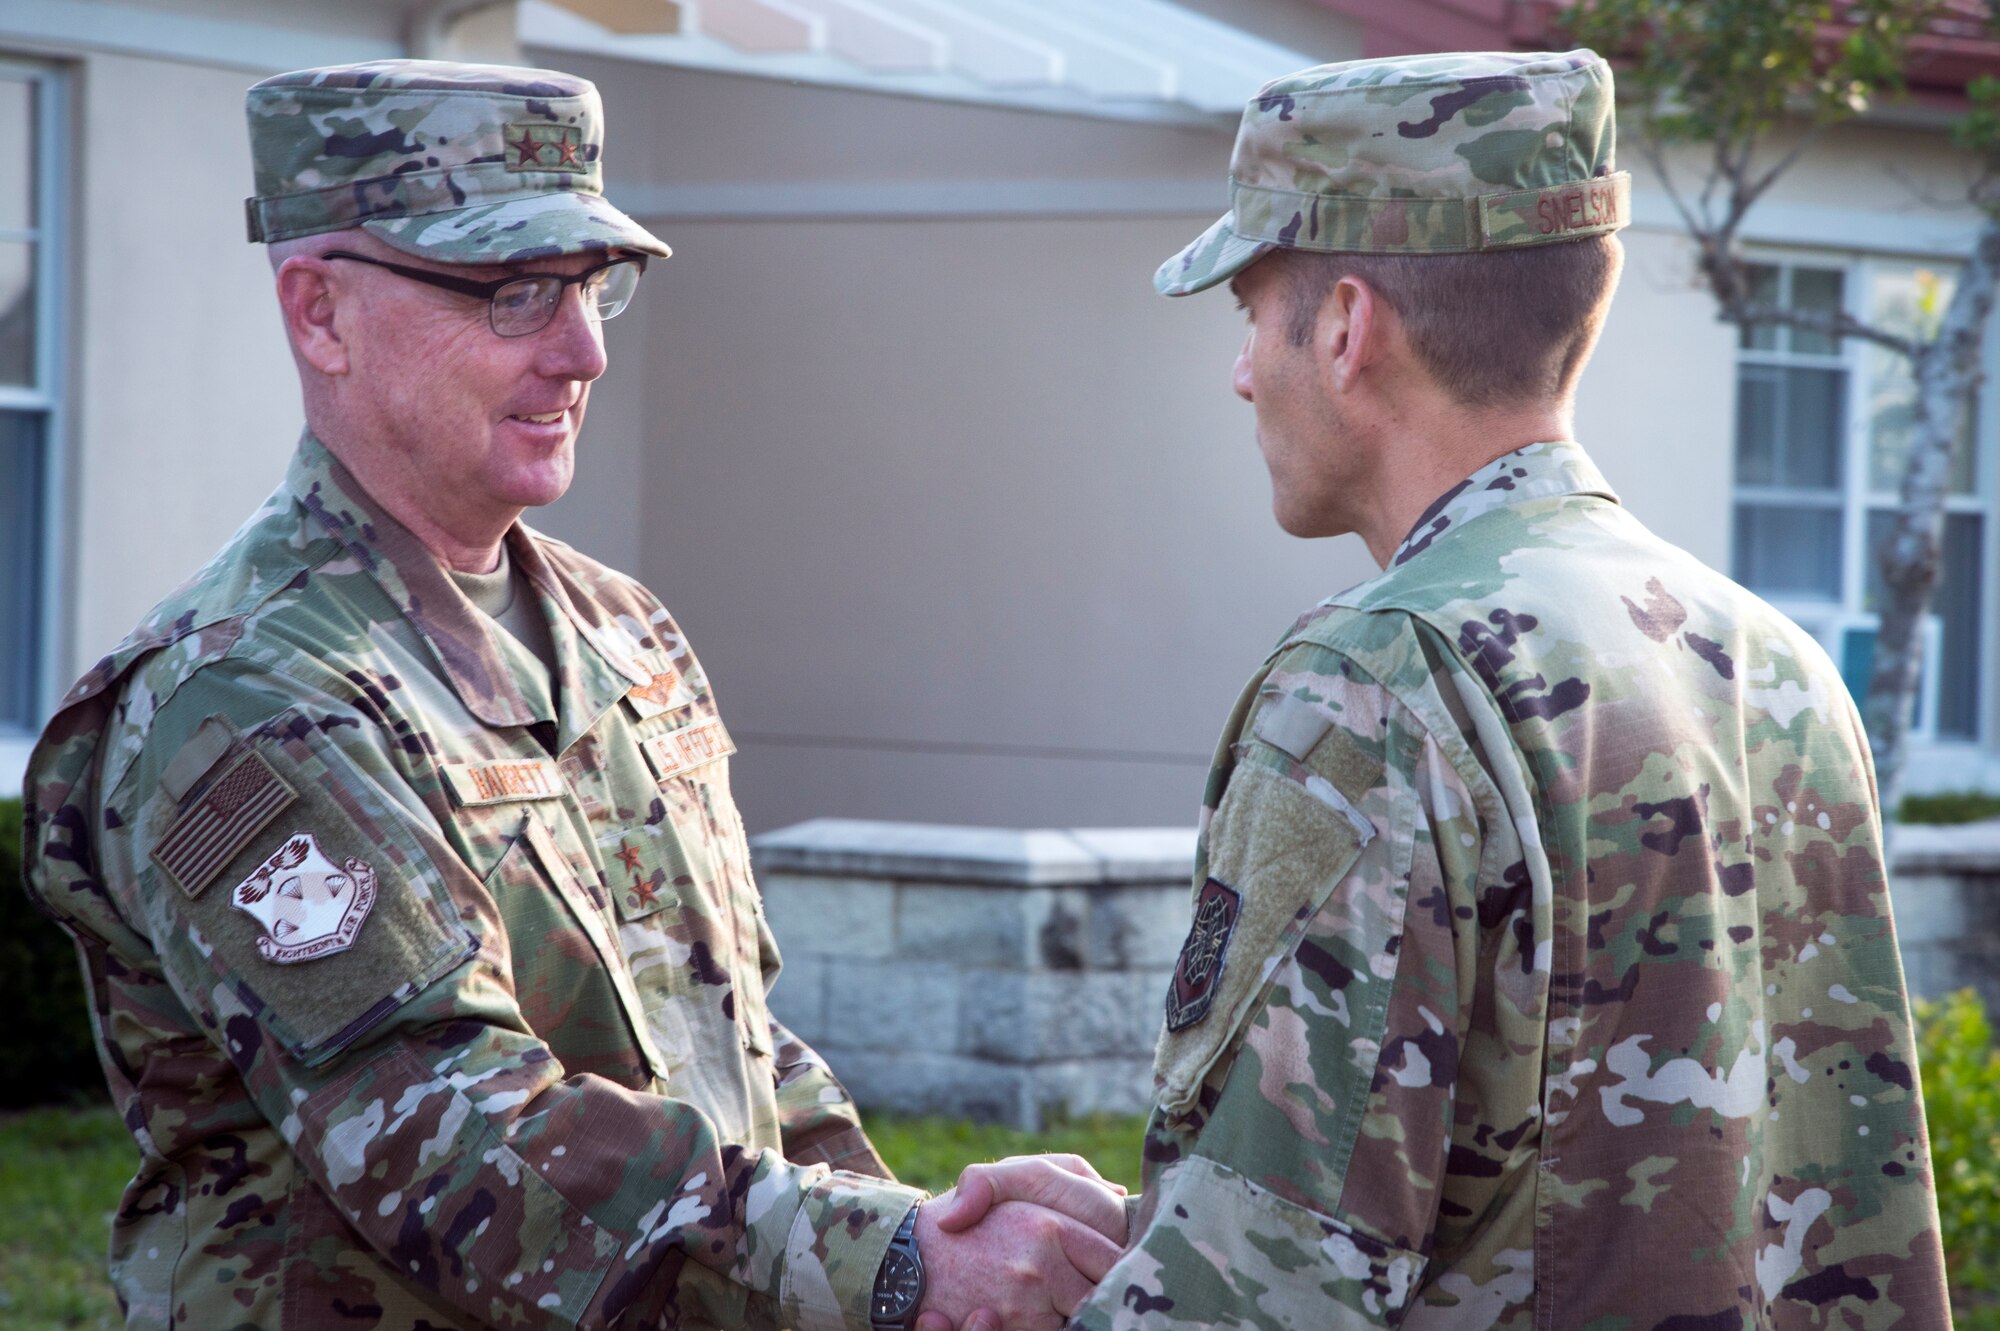 U.S. Air Force Col. Stephen Snelson, right, the 6th Air Mobility Wing commander, greets Maj. Gen. Sam Barrett, left, the 18th Air Force (AF) commander from Scott Air Force Base, Ill., at MacDill AFB, Fla., May 7, 2019.